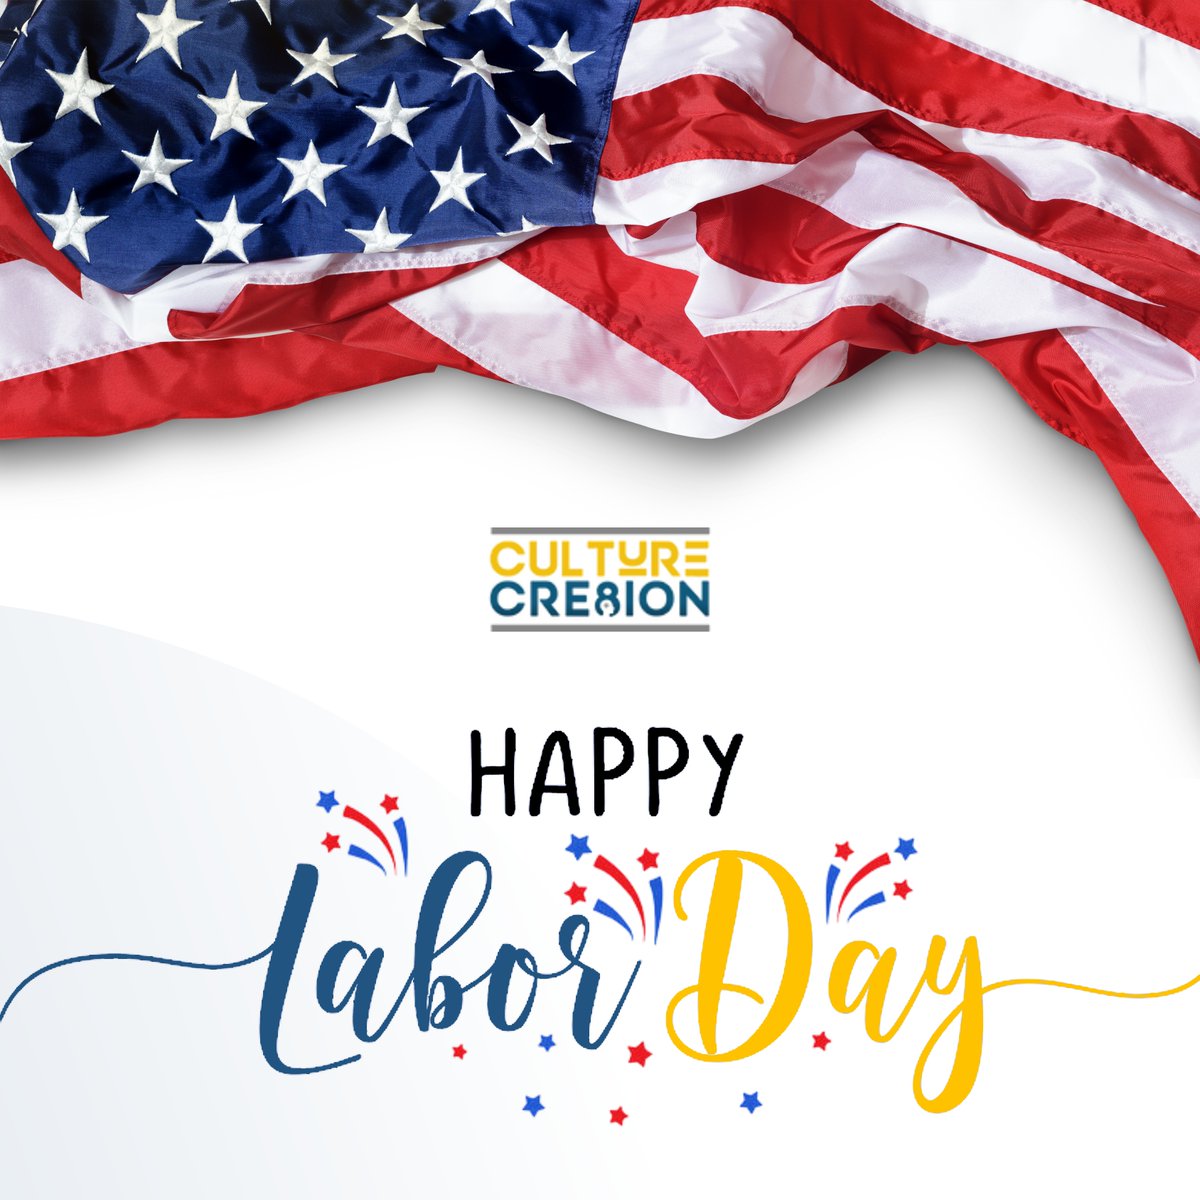 On Labor Day, we celebrate the incredible contributions of the workforce that drives our nation's progress. It's a day to honor the sweat, dedication.
.
Happy Labor Day! 💪
.
#WorkplaceCulture #Dedication #HardWorkPaysOff #JobGoals